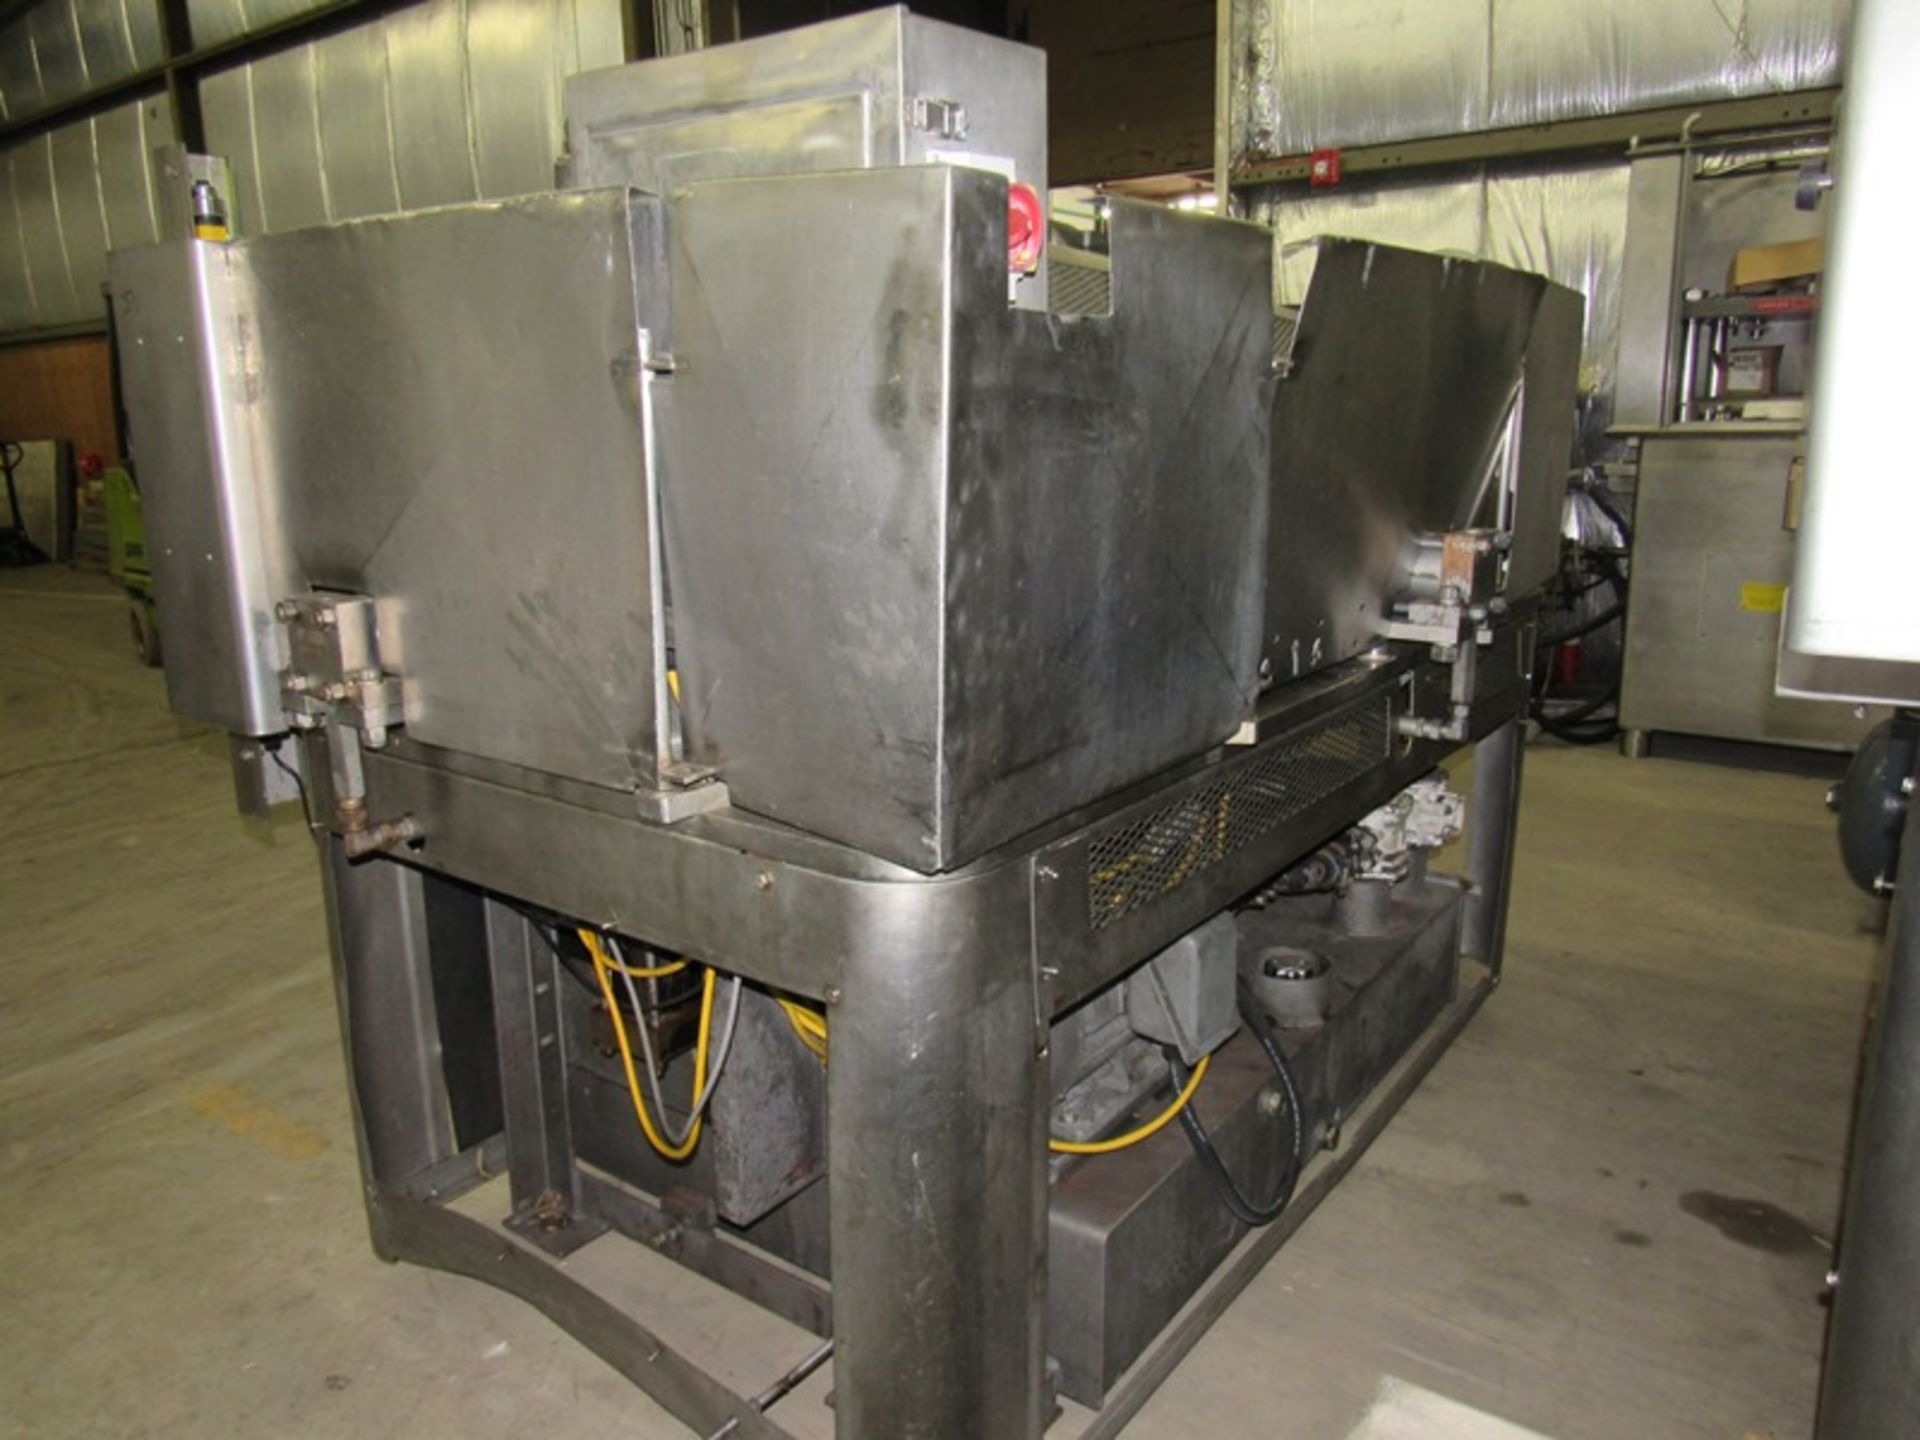 Anco Mdl. 1411 Bacon Press designed to press uniform thickness and width to maximize slicing yields, - Image 4 of 16